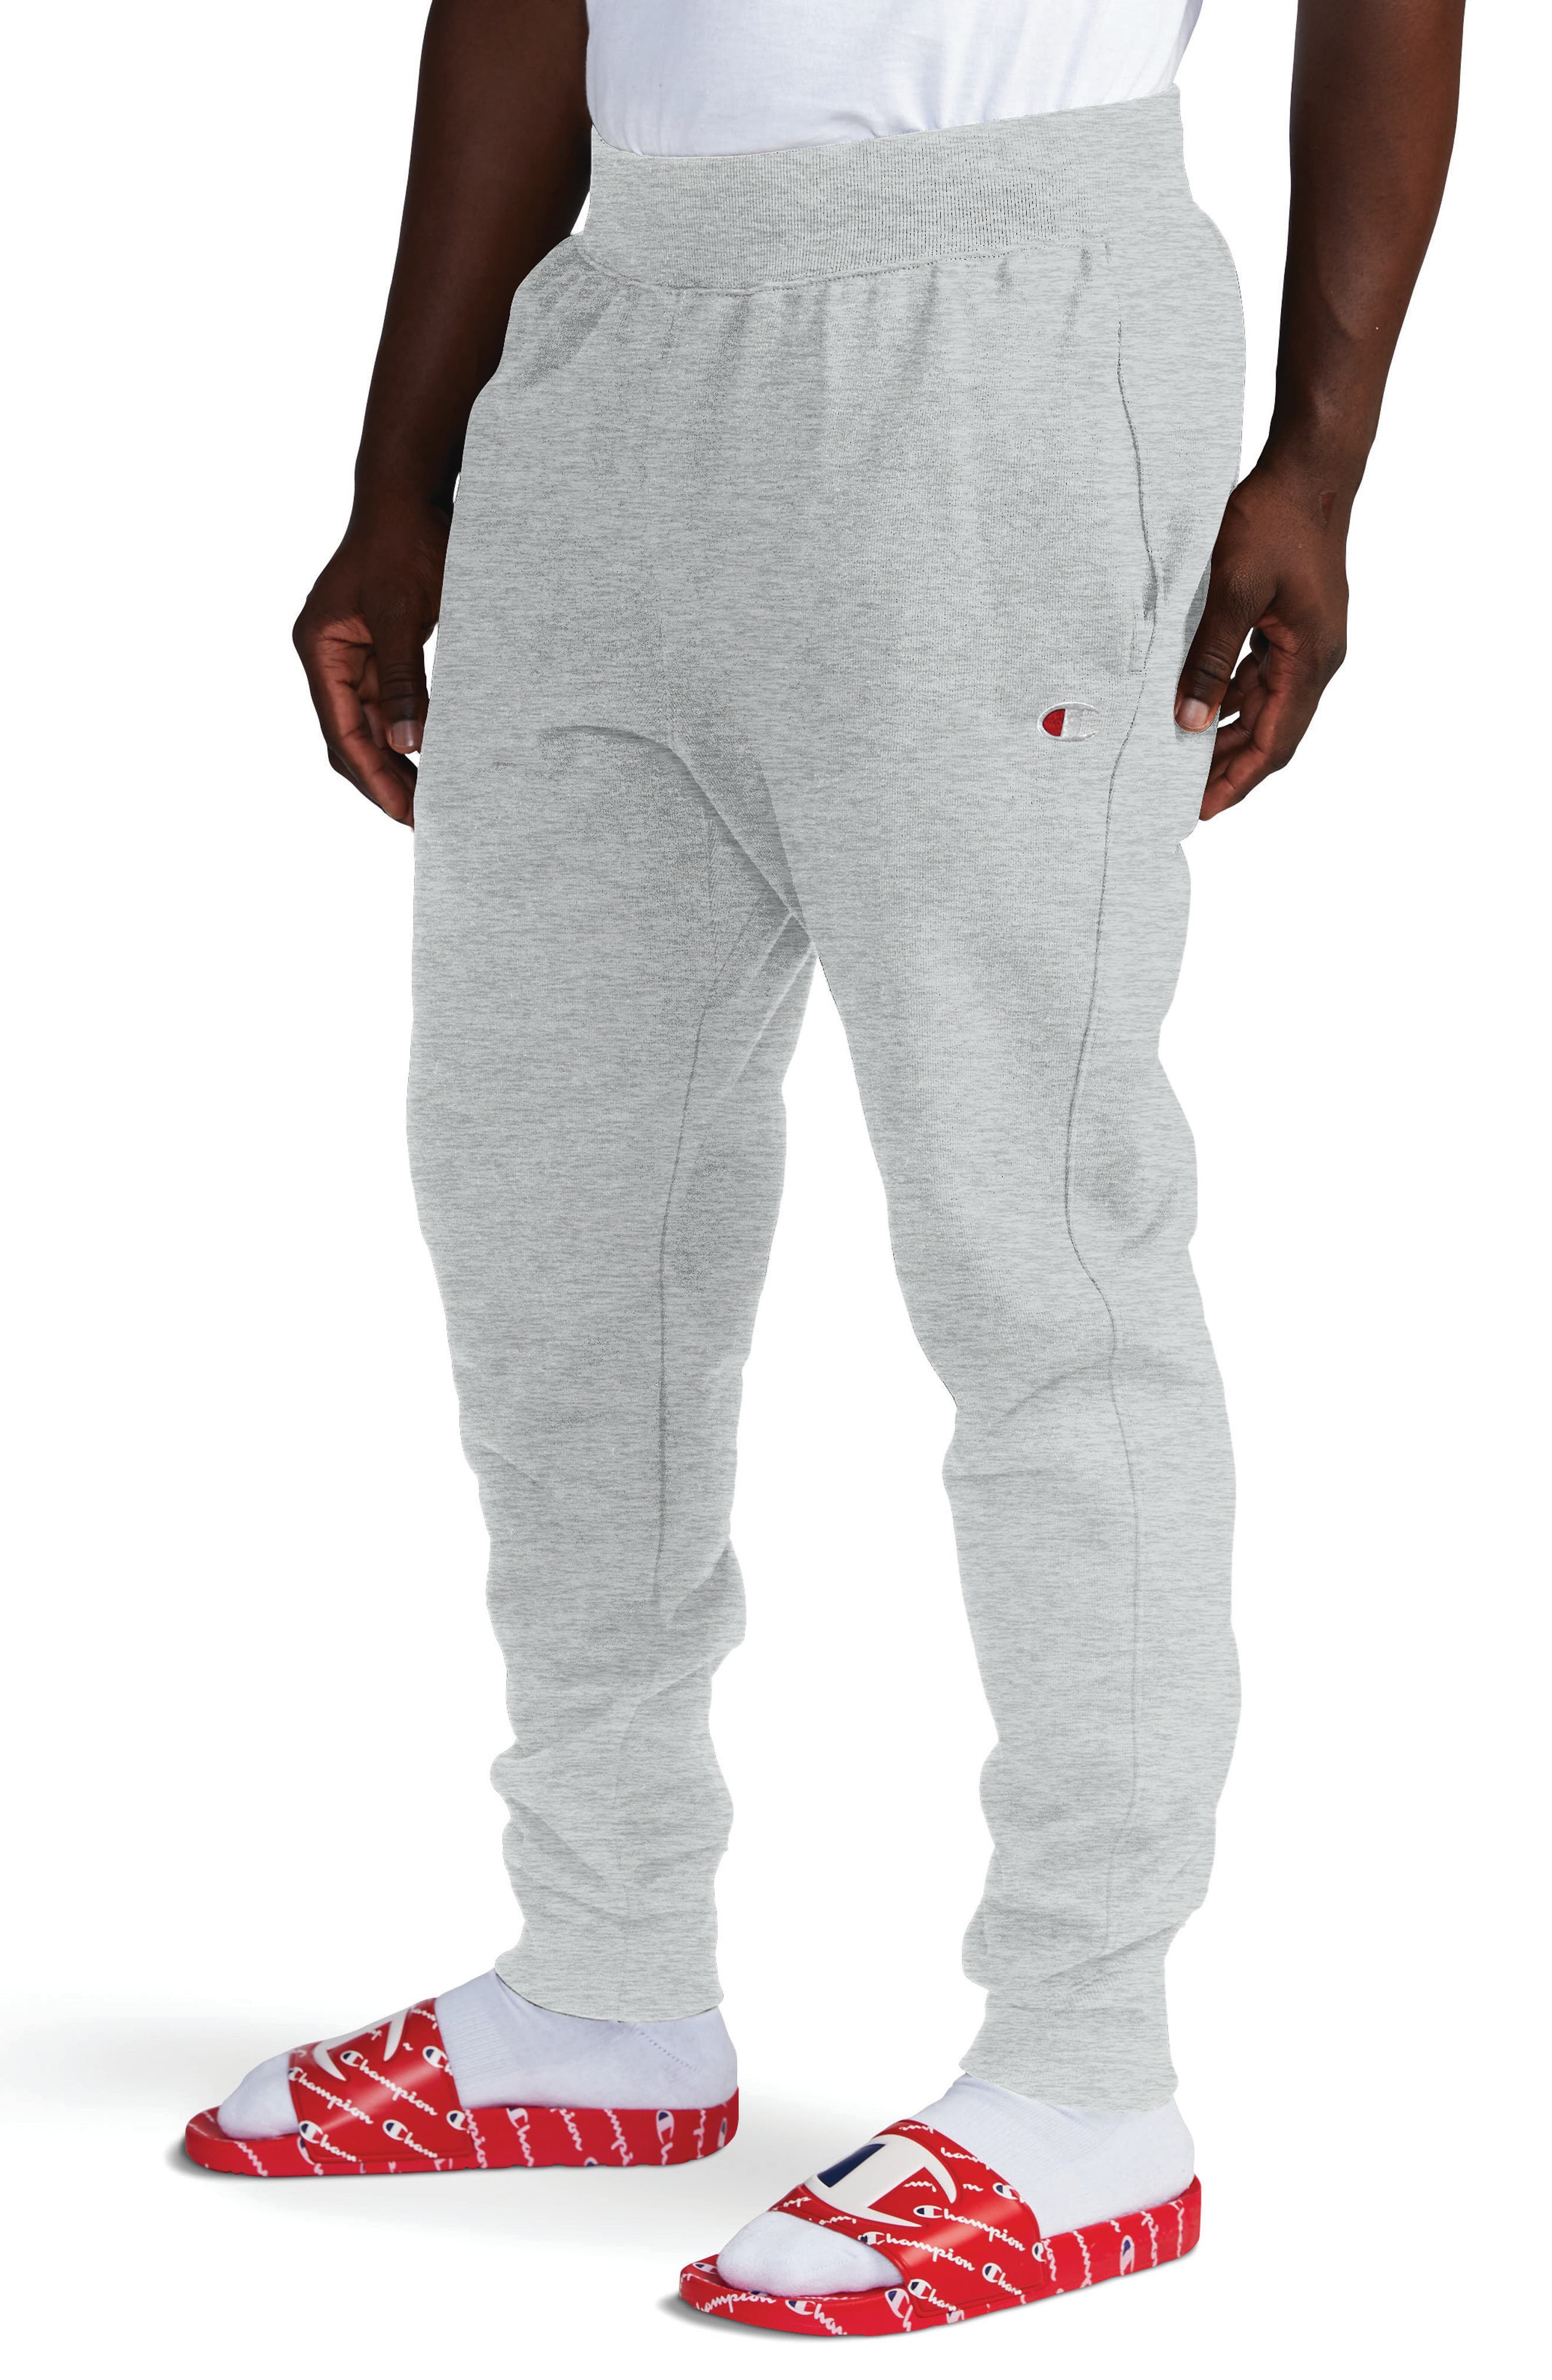 Details about   NWT CHAMPION LOGO REVERSE WEAVE JOGGER PANT IN BLACK S M L XL BEST SELLING SDOUT